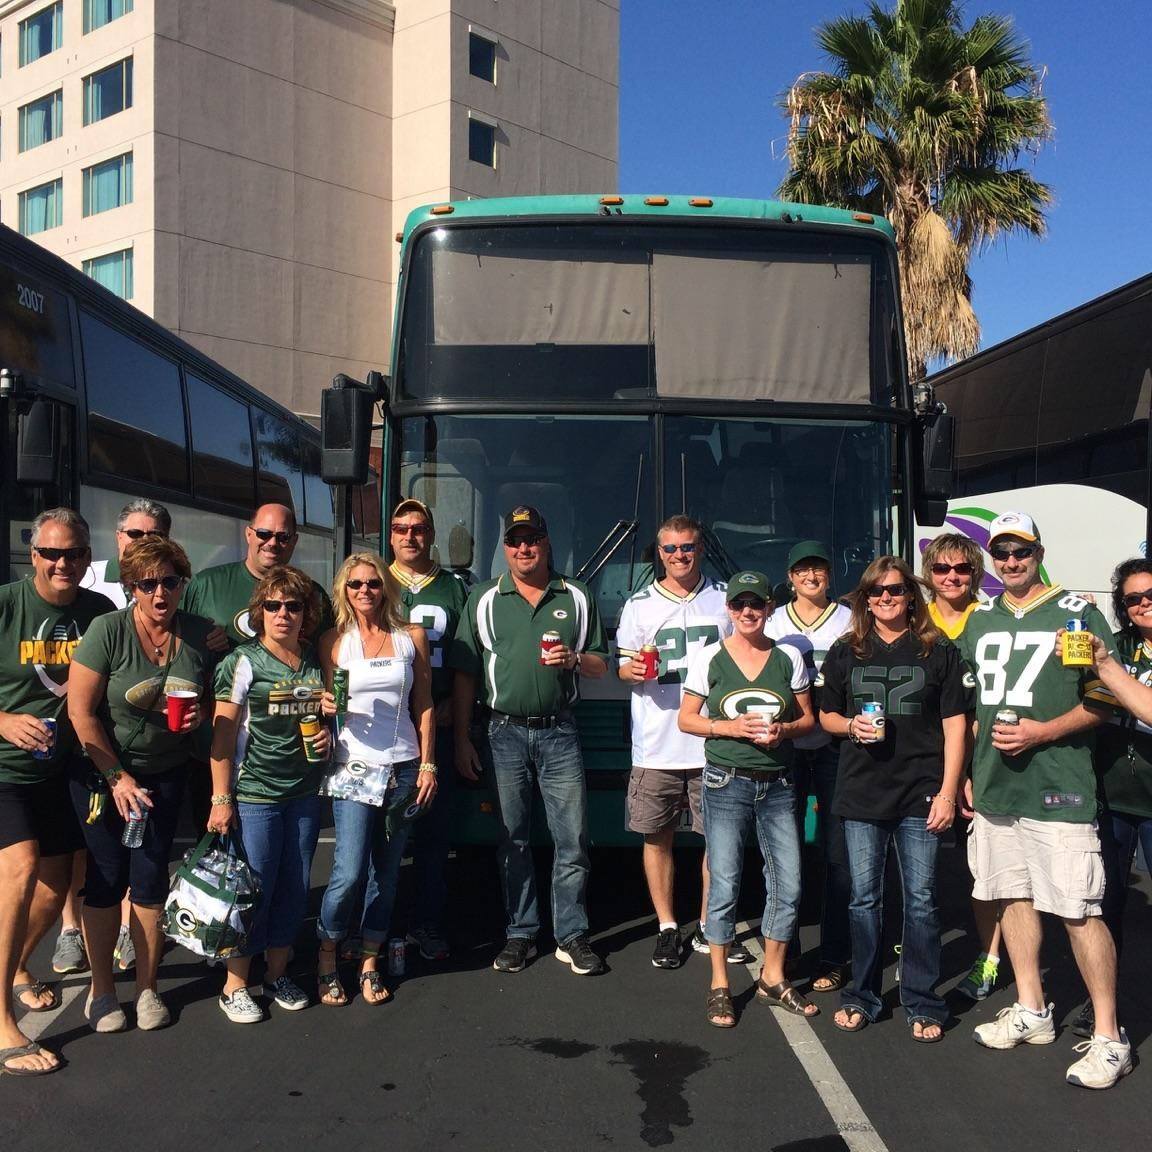 Green Bay Packers fans in front of their Rally bus in San Francisco, CA. 